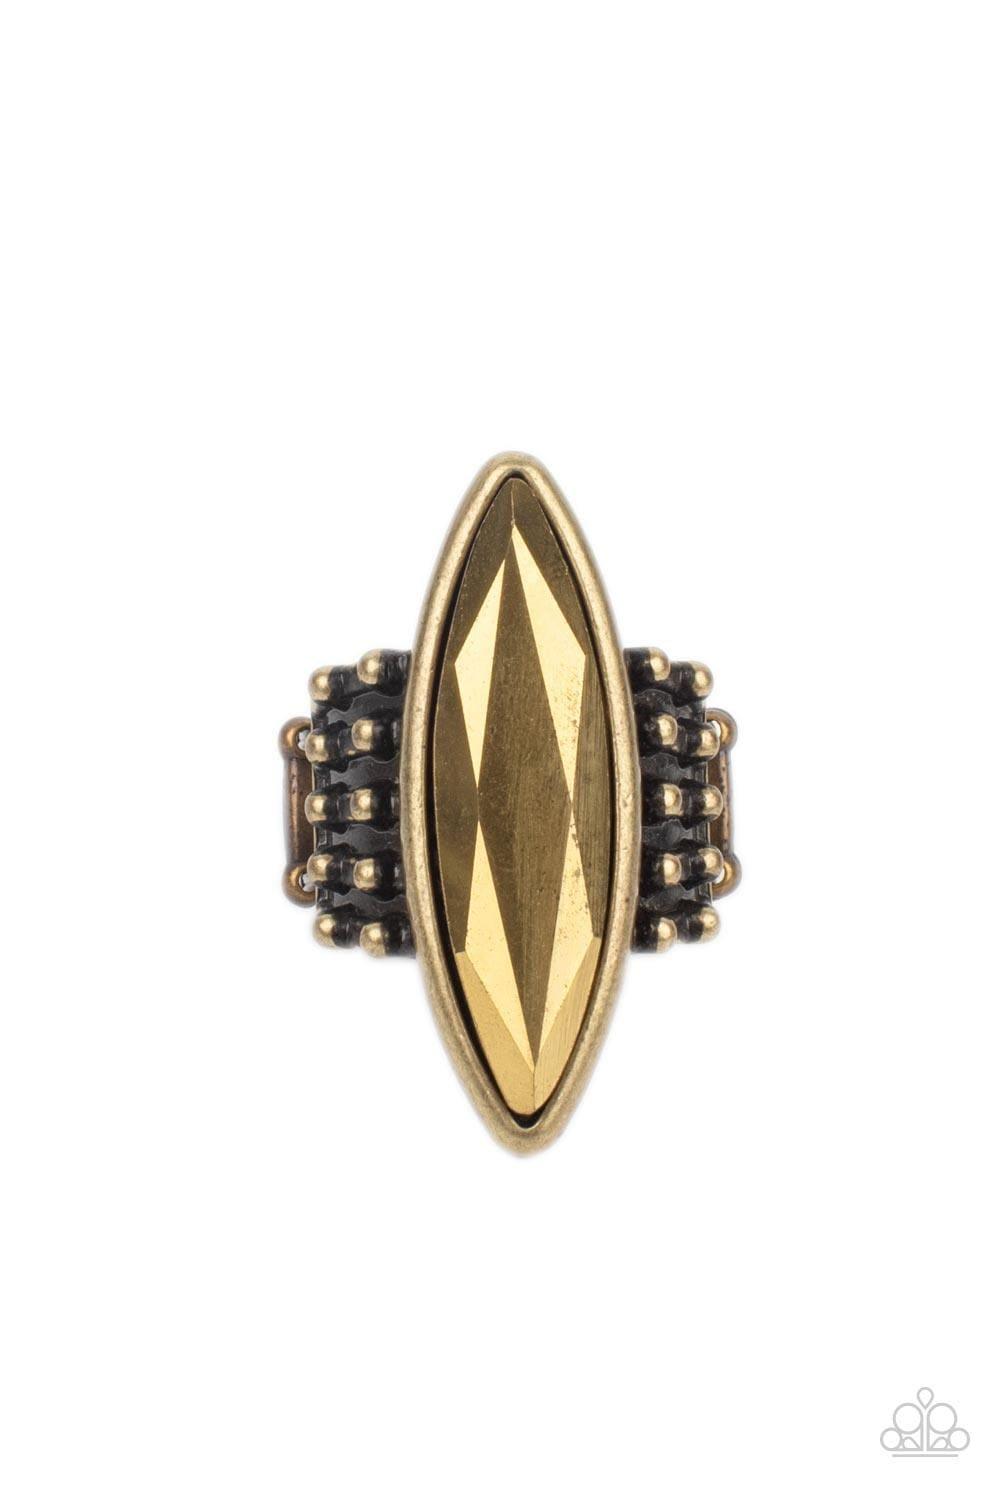 Paparazzi Accessories - Renegade Radiance - Brass Ring - Bling by JessieK